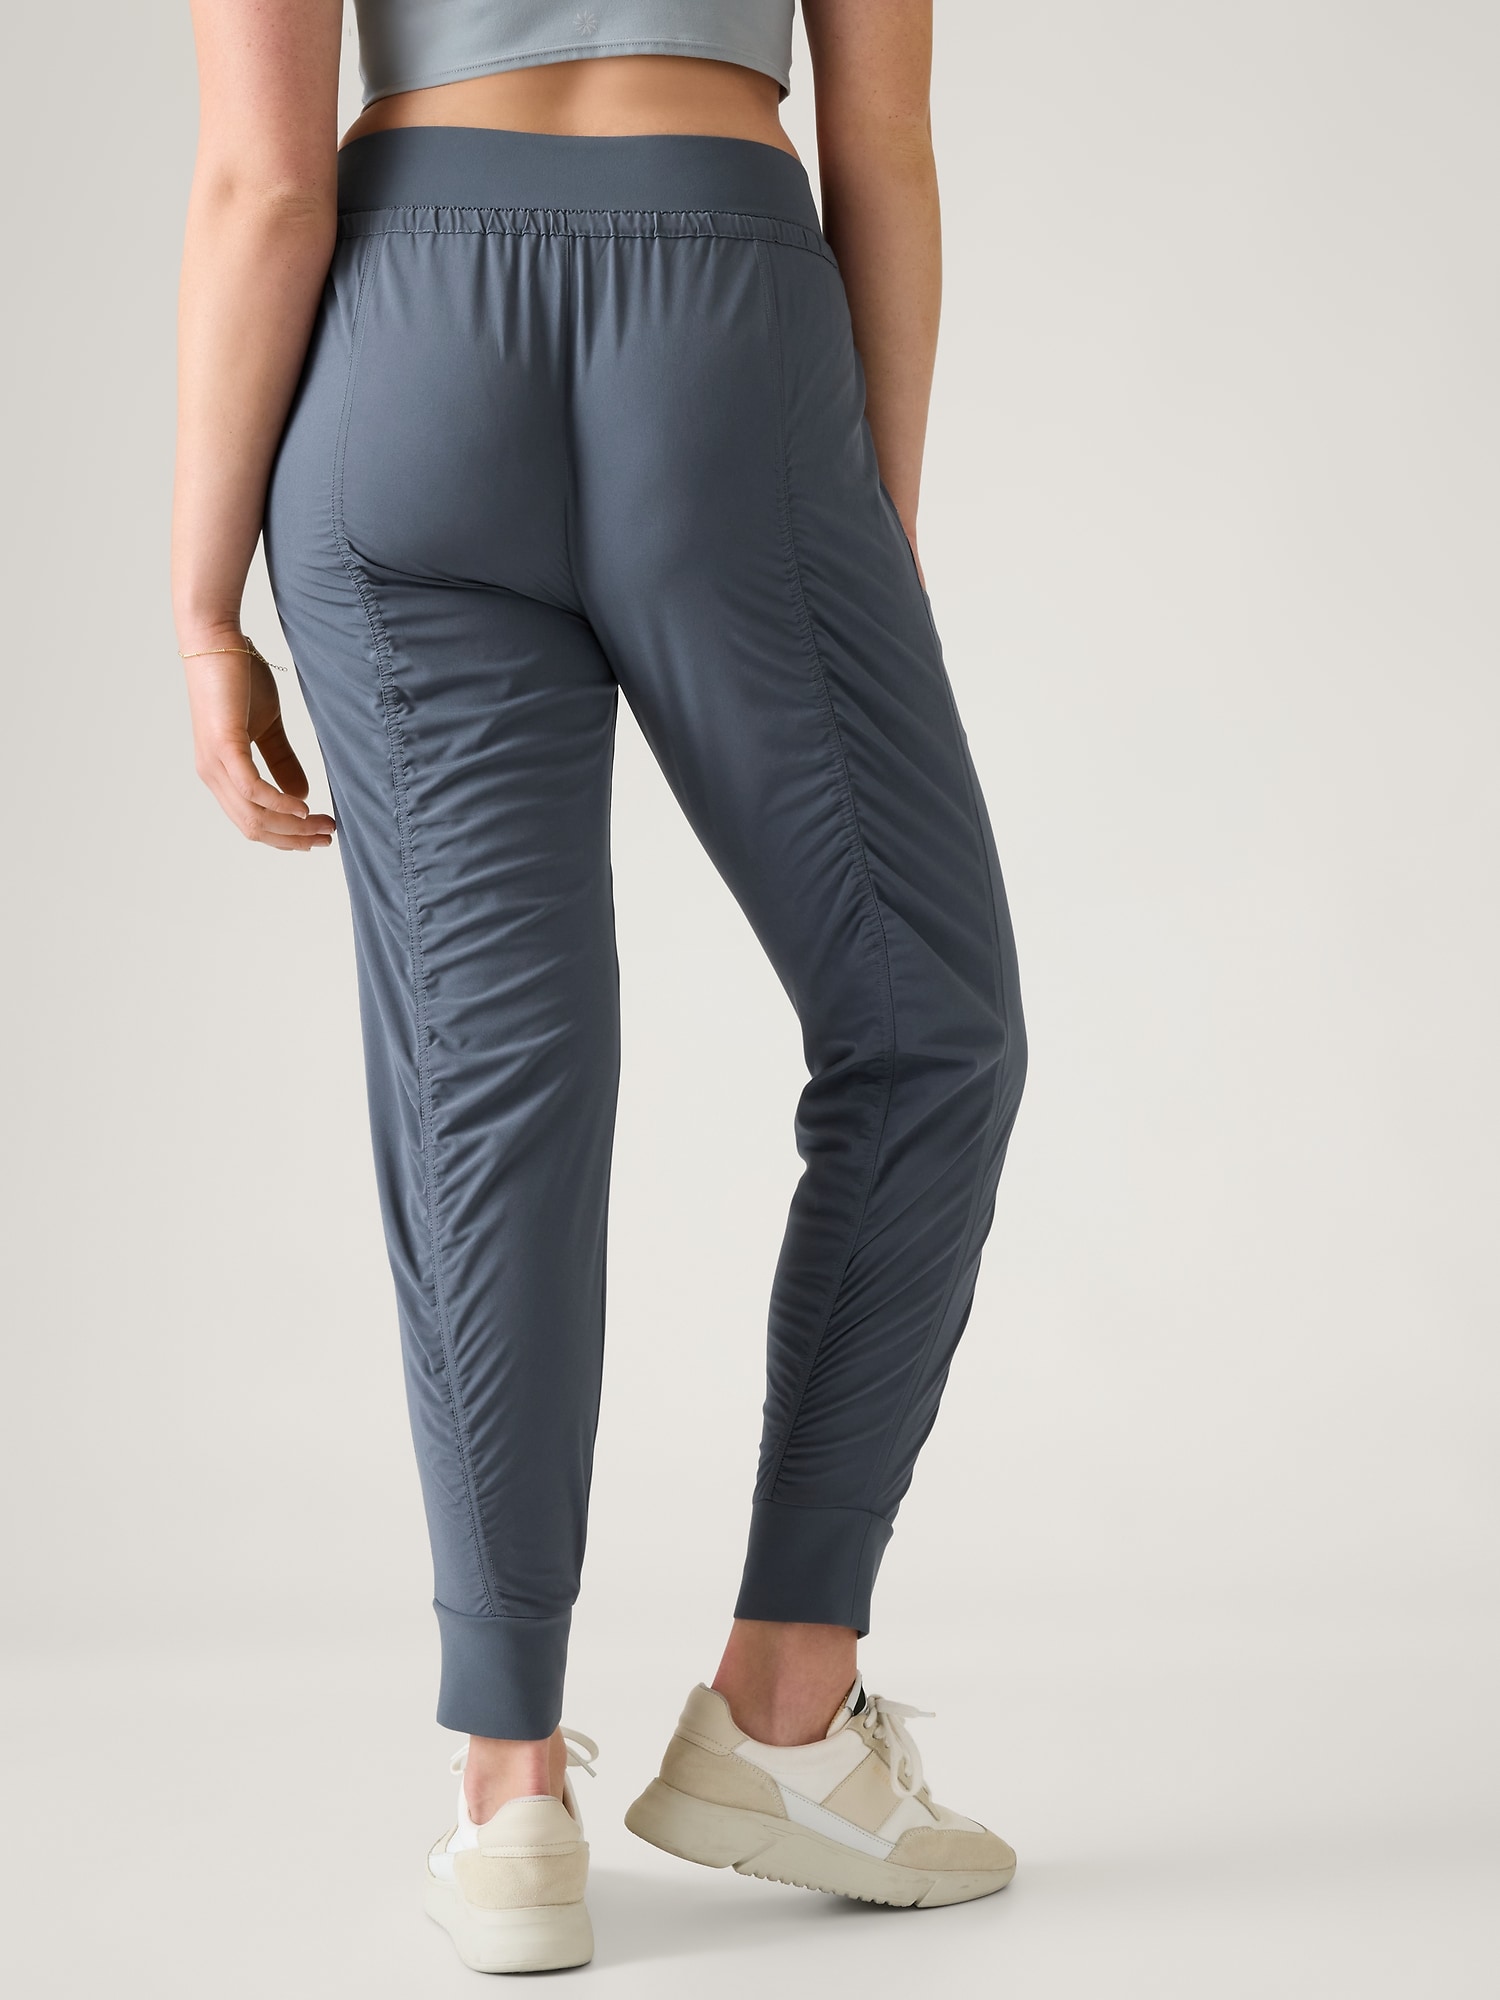 Athleta Joggers & The Search For Workout Pants That Aren't